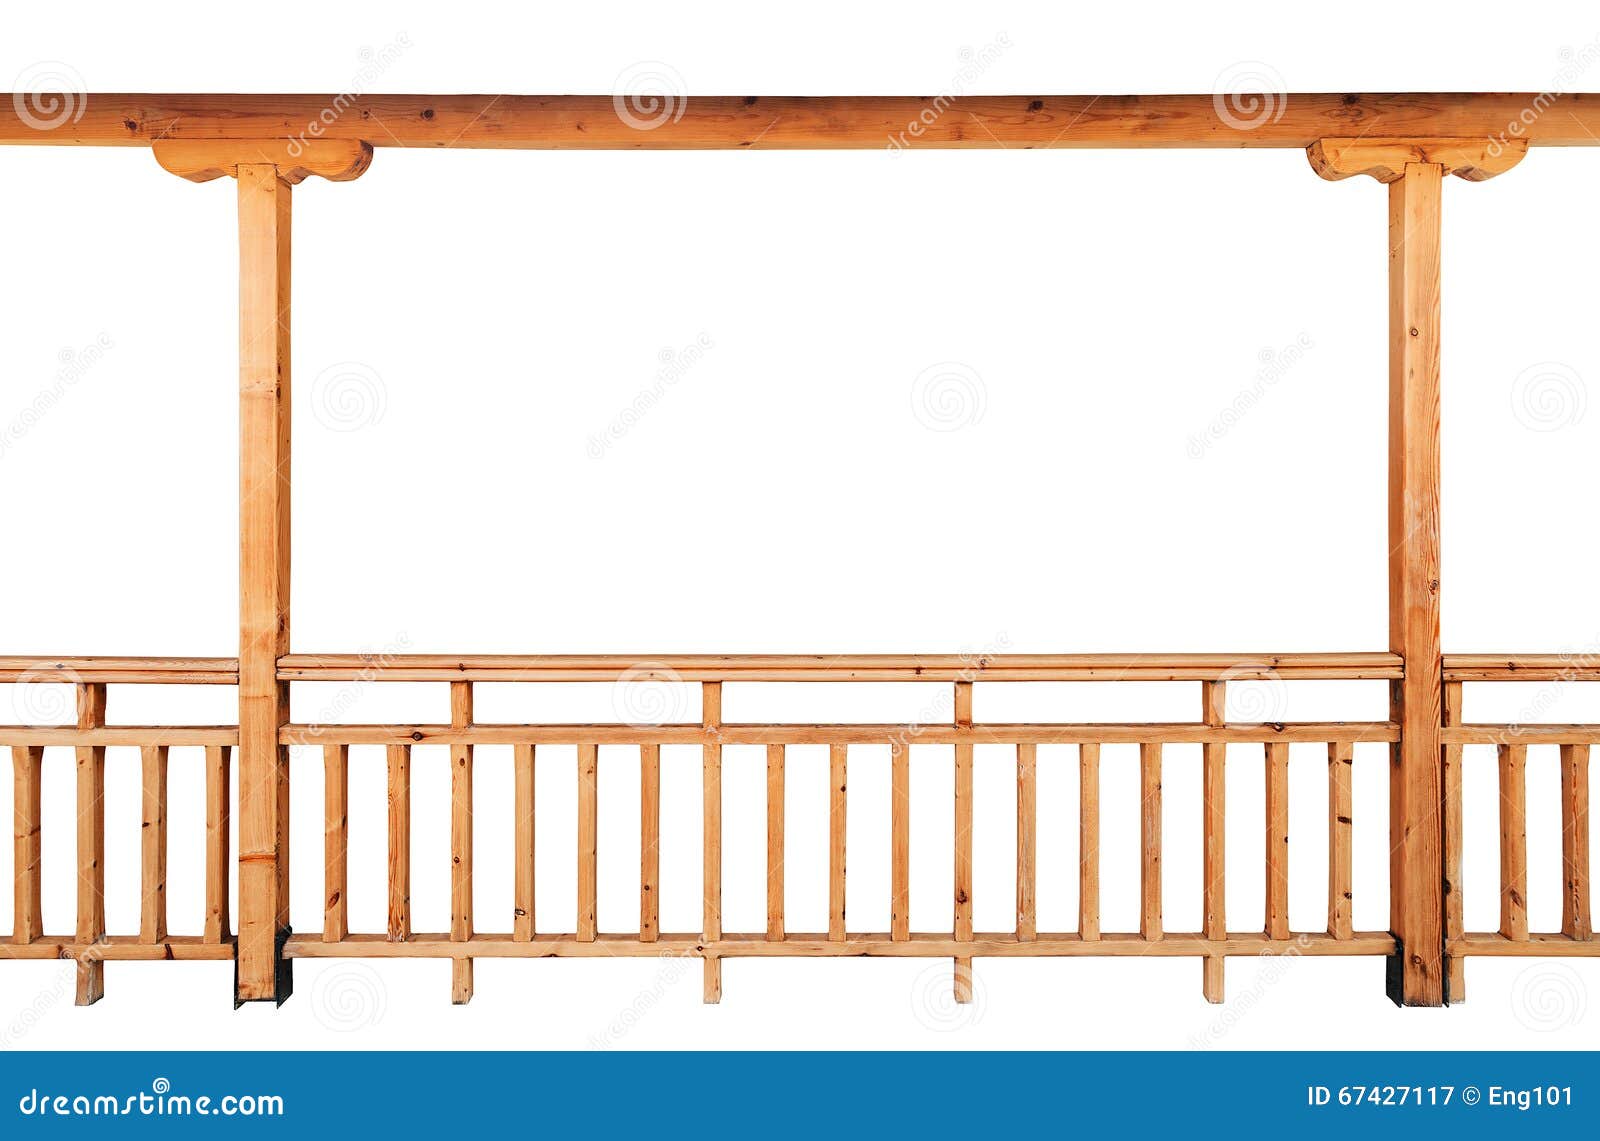 wooden column and railing  on white background